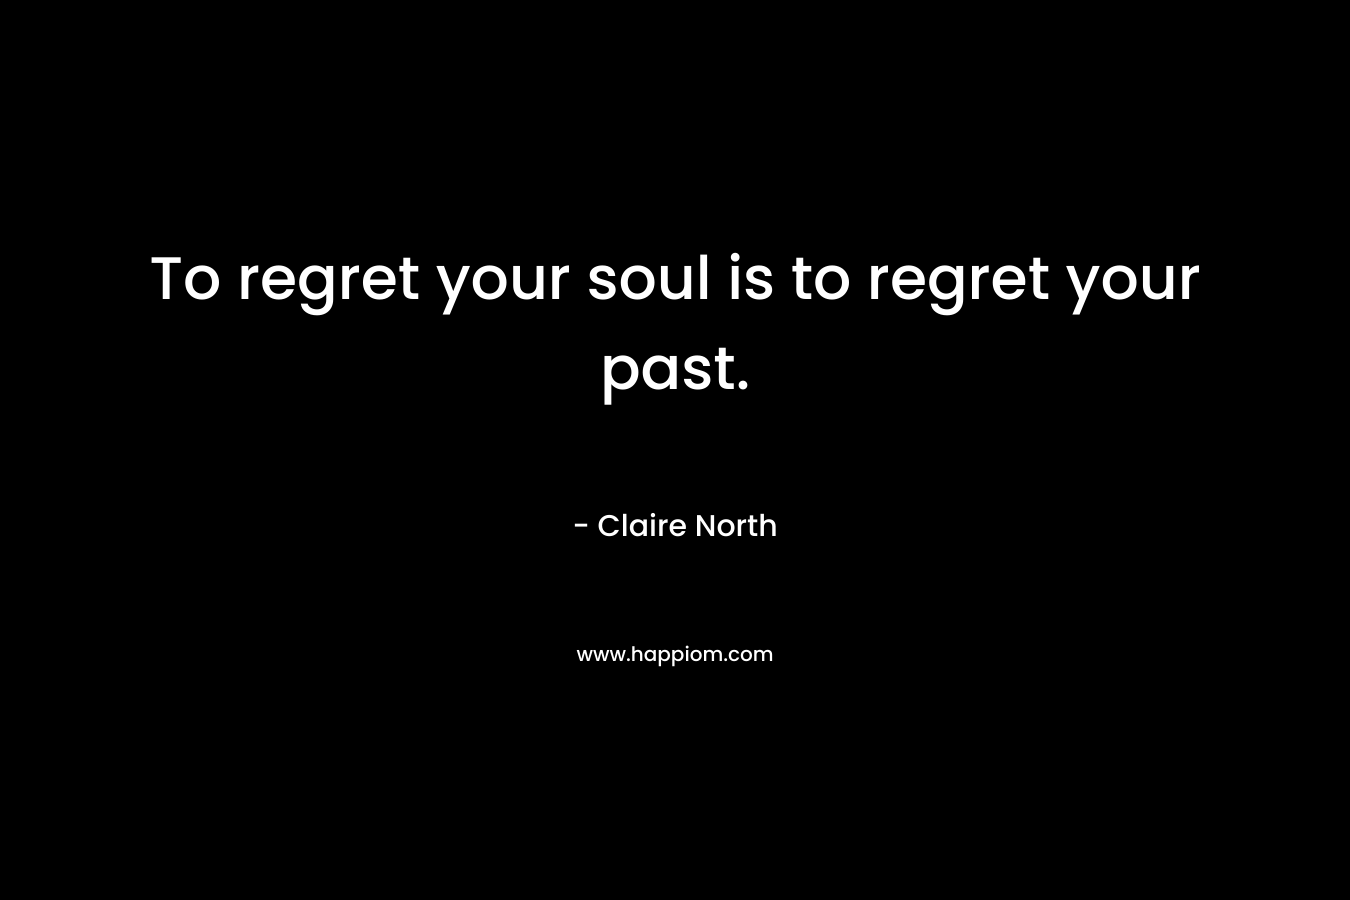 To regret your soul is to regret your past.